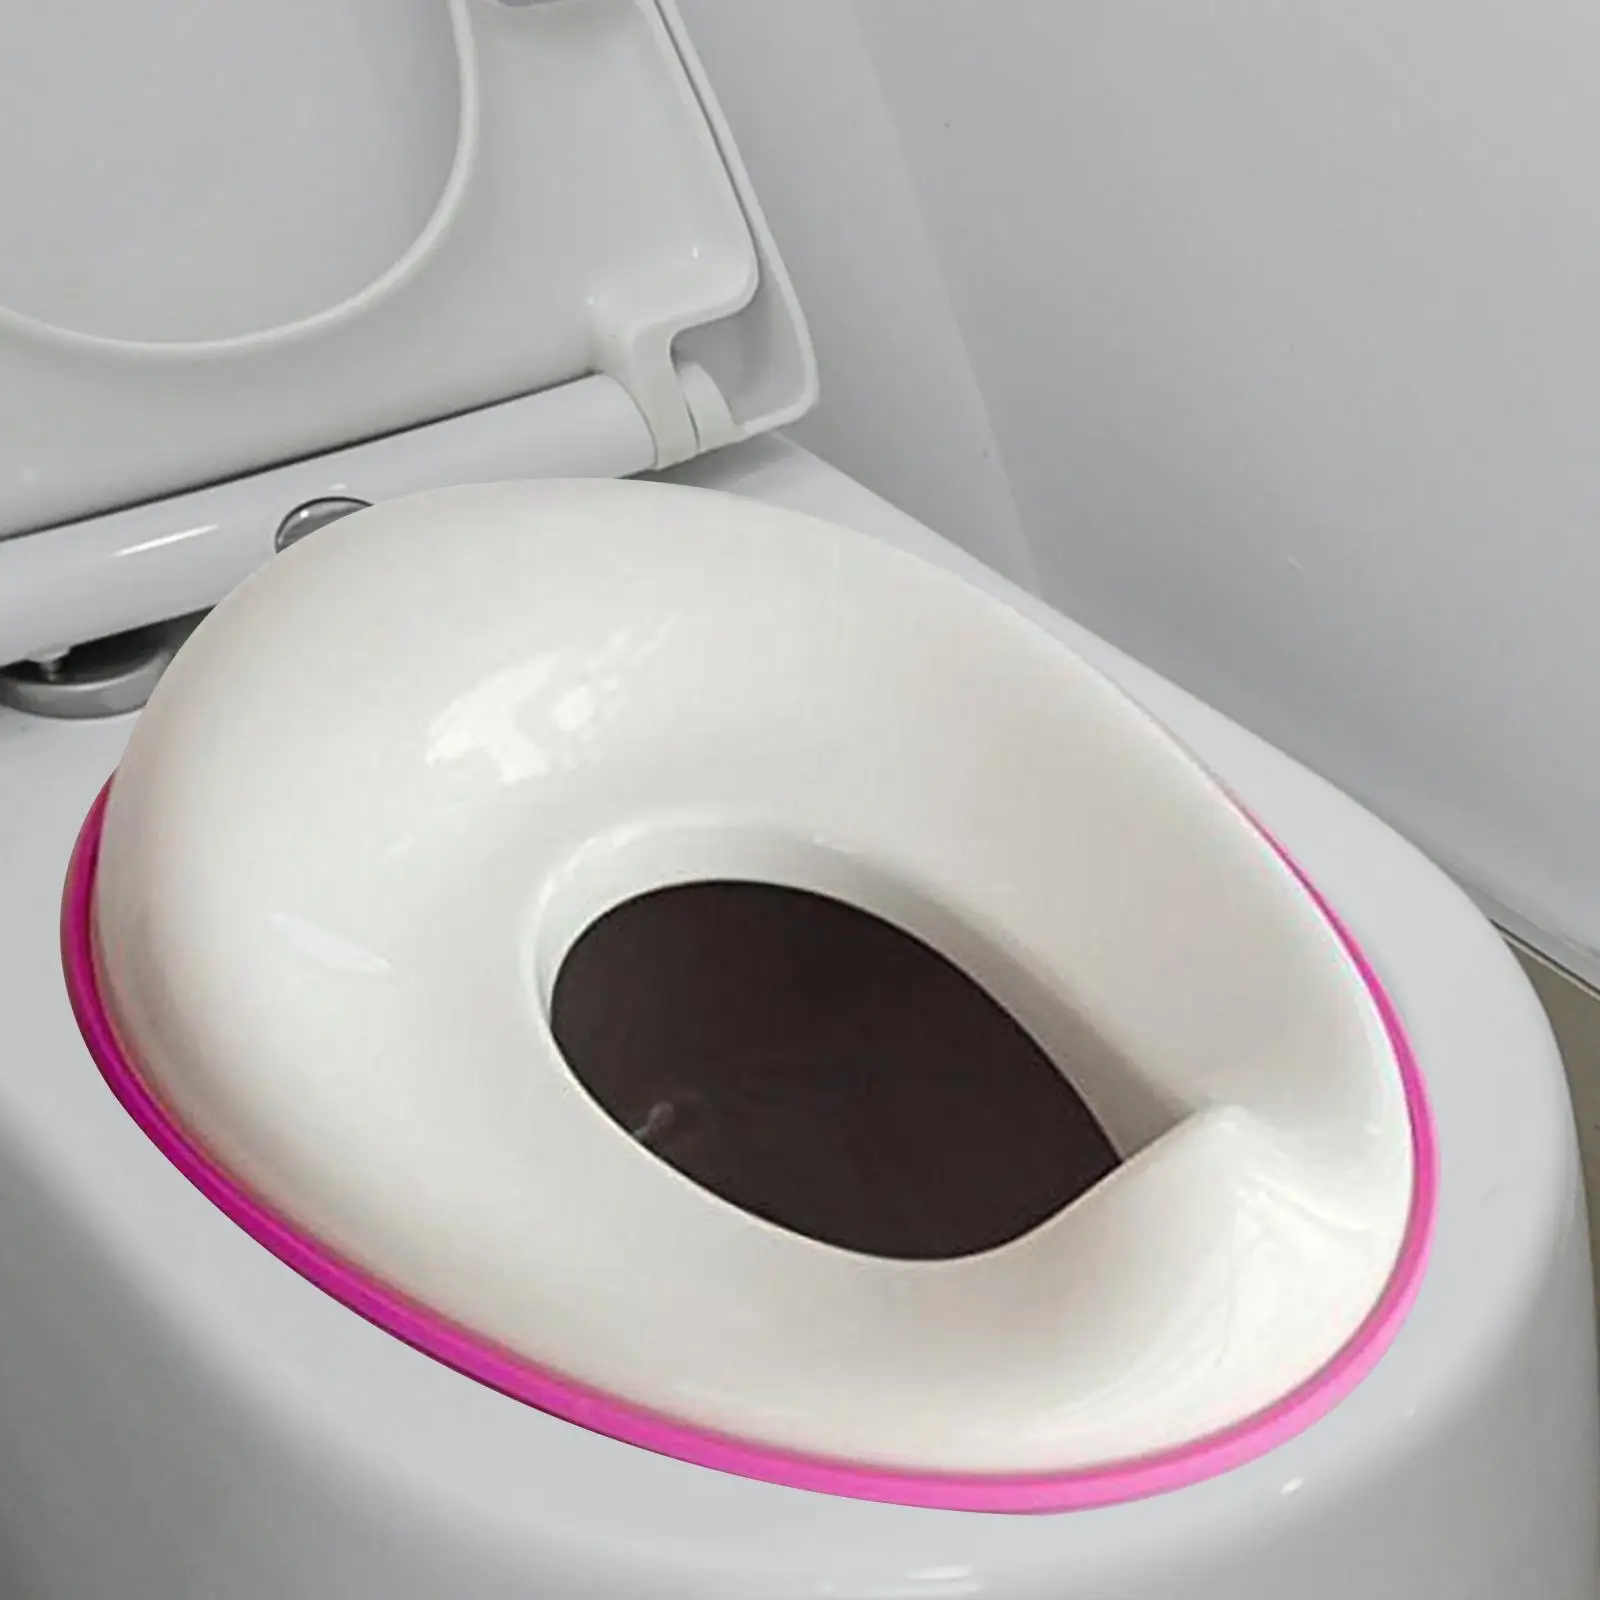 Kids Toddlers Toilet training Seat Fits Round & Oval Toilets Potty Seat Ring